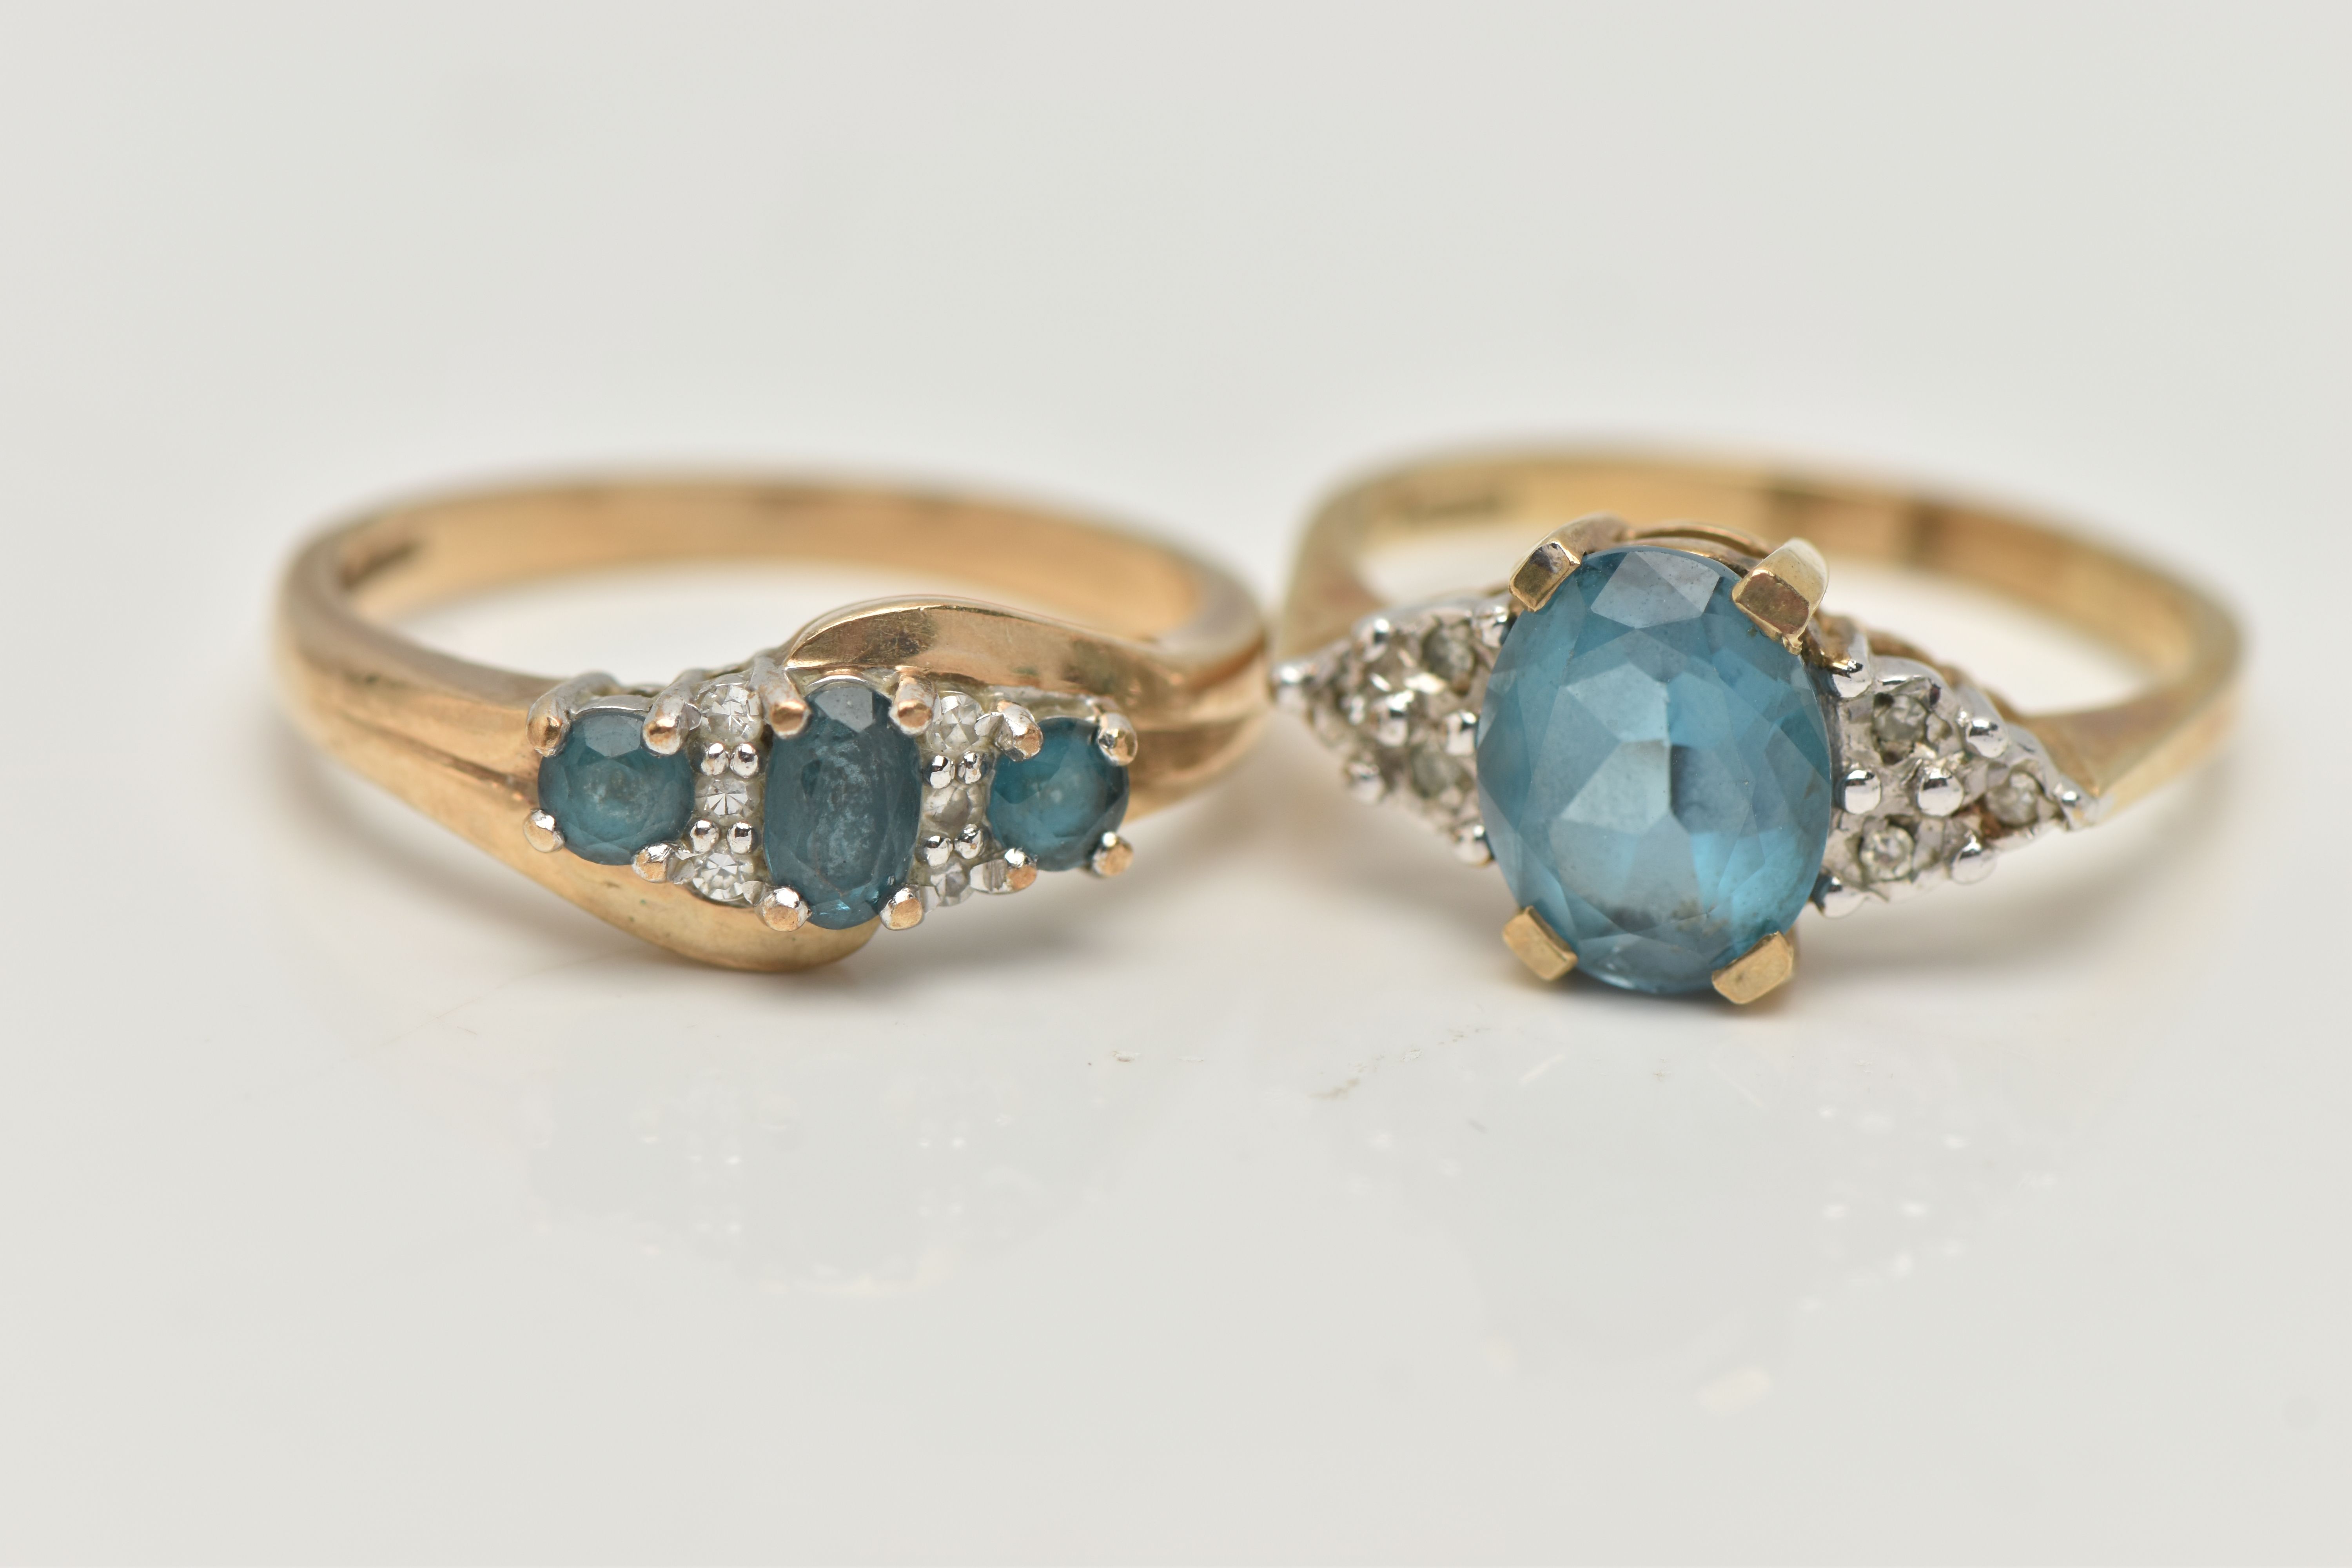 TWO 9CT GOLD GEM SET RINGS, the first an oval cut blue topaz, flanked with six single cut